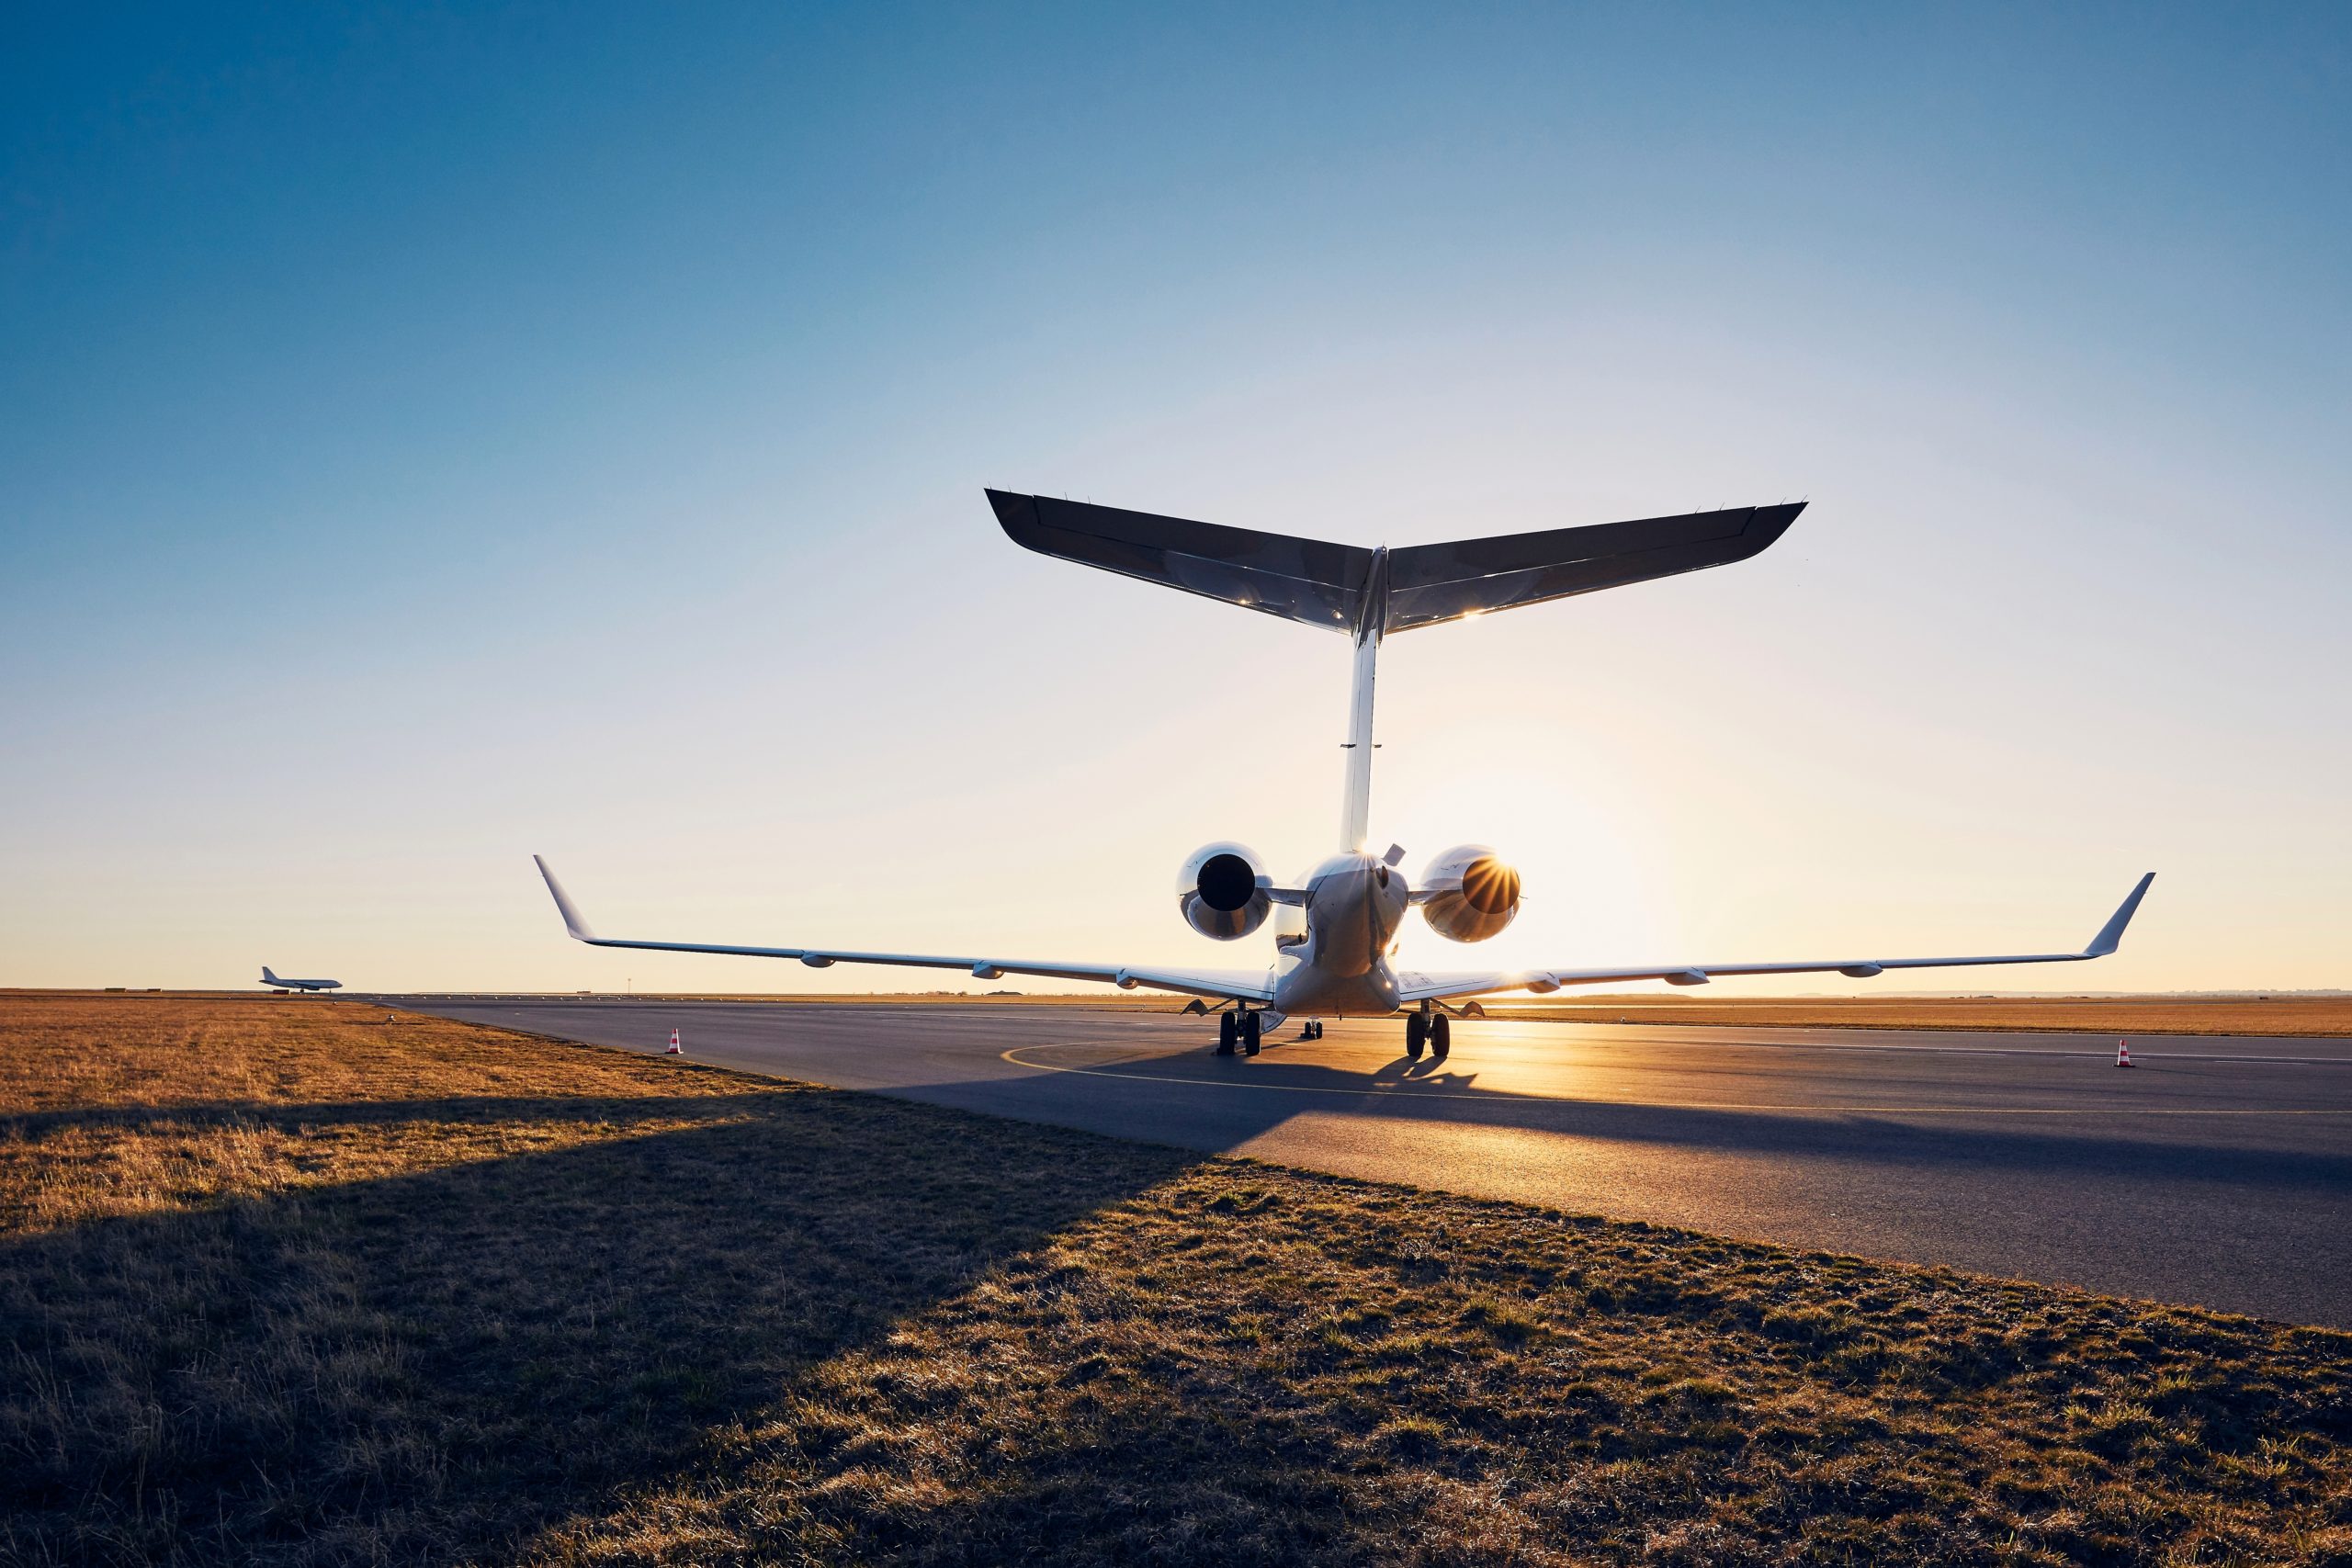 Business Aviation &
Infrastructure